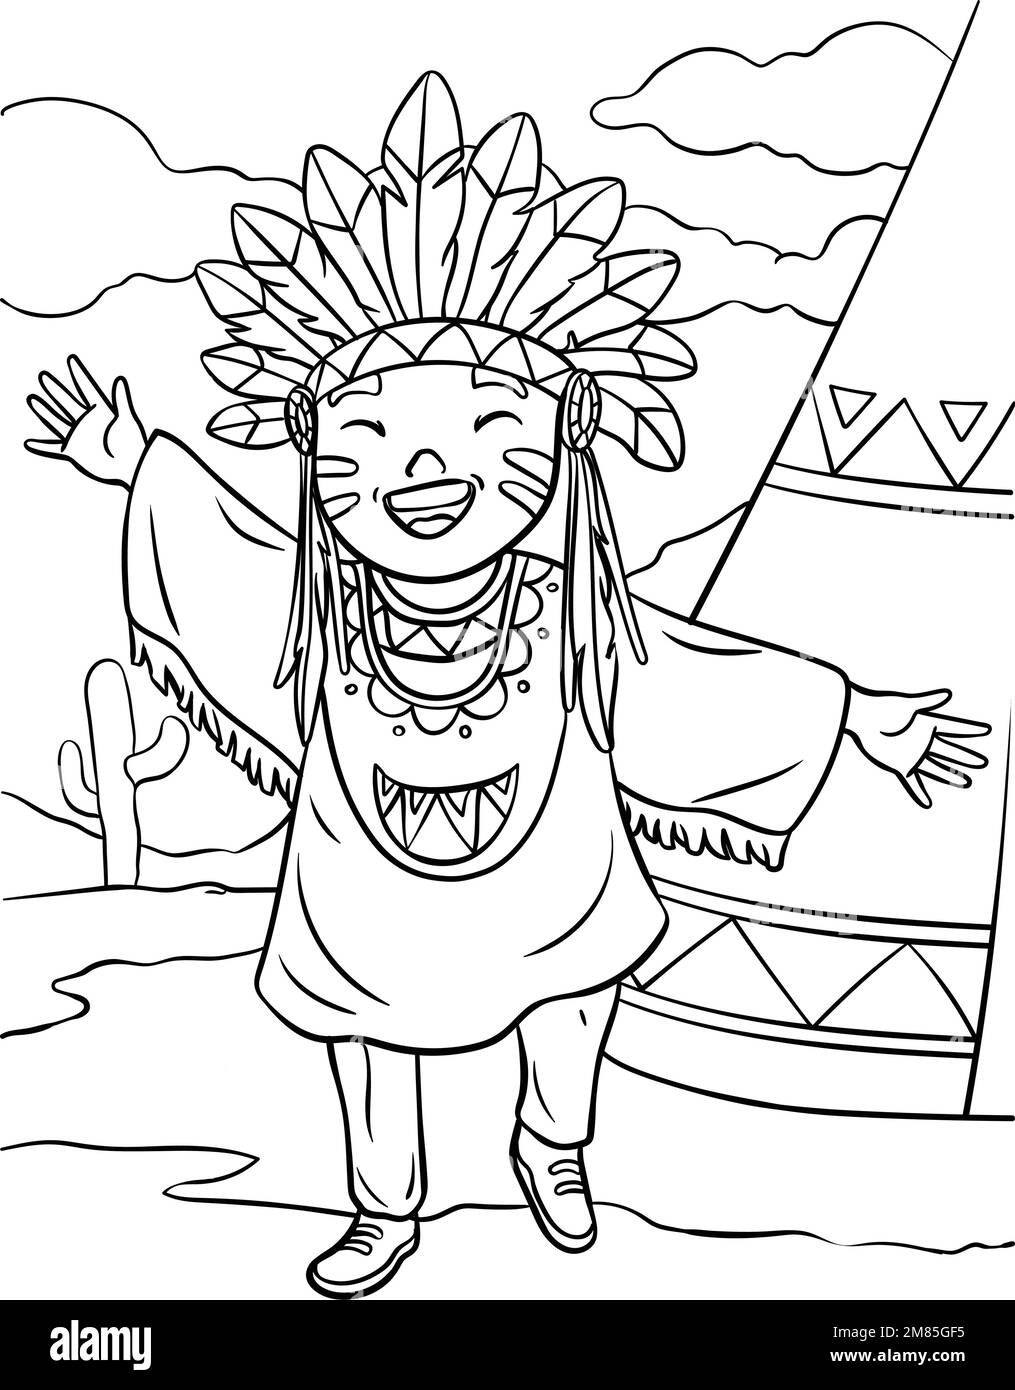 Happy Native American Indian Girl Coloring Page  Stock Vector